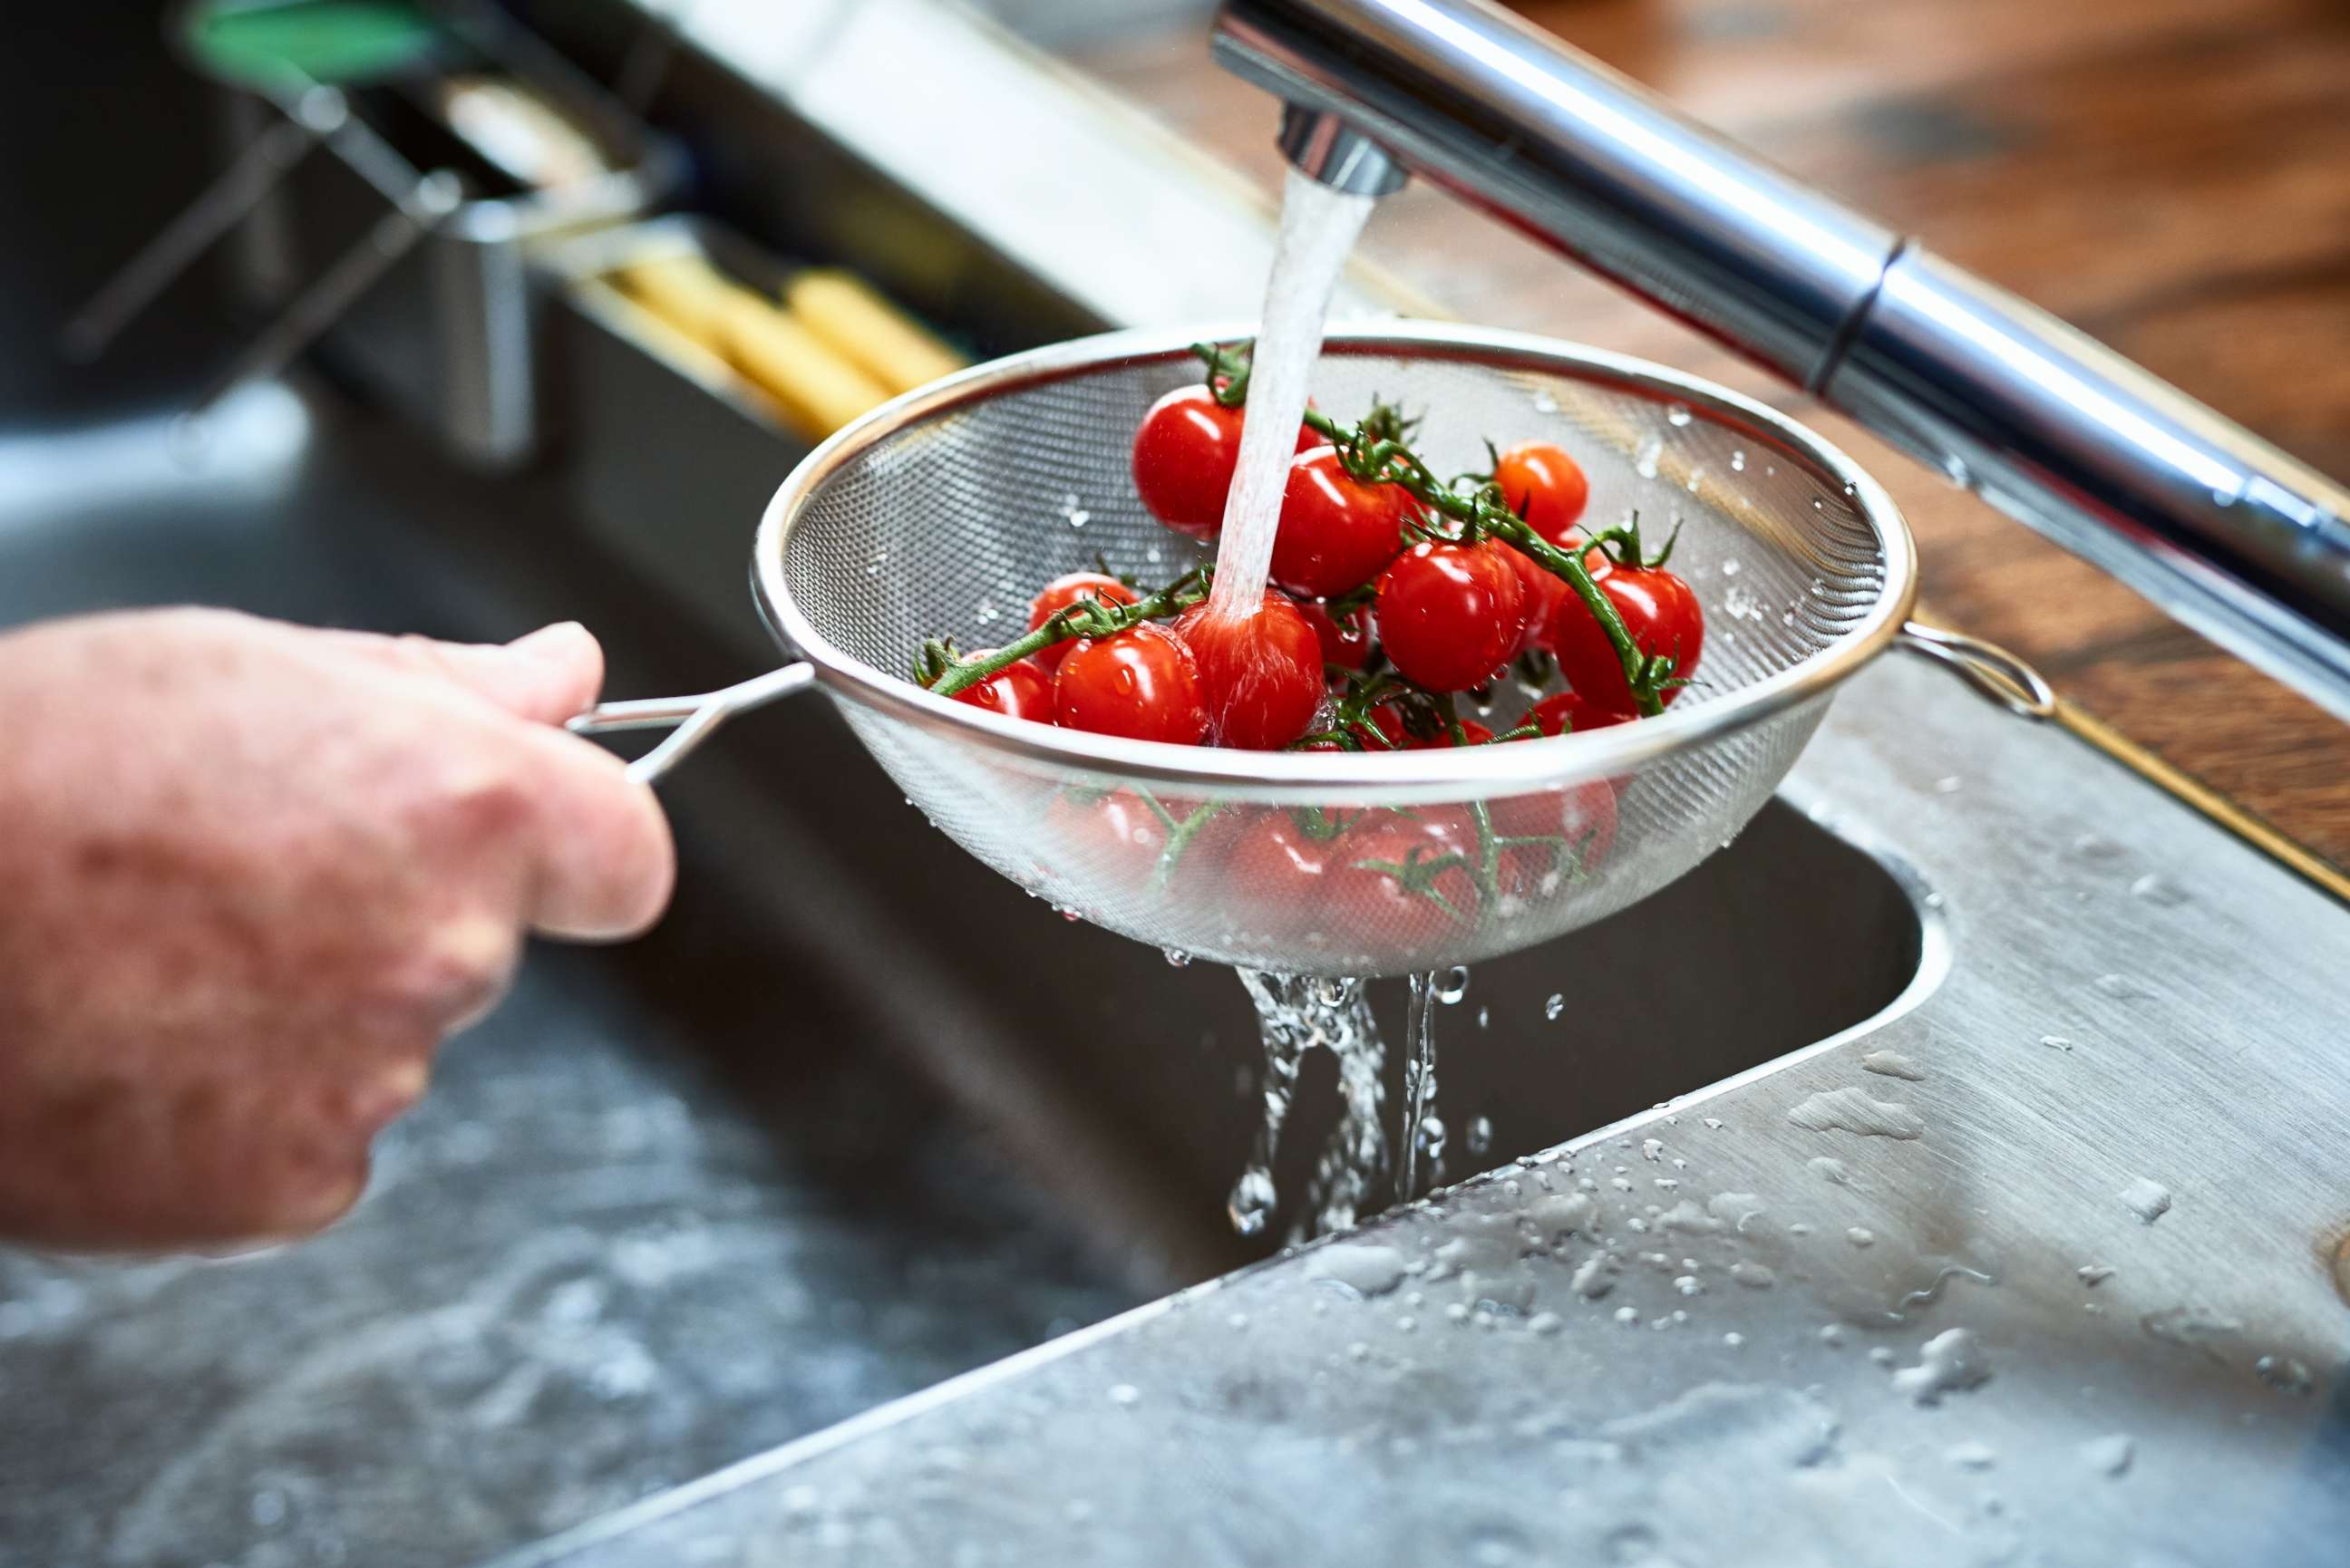 PHOTO: Tomatoes are washed in a sink in this stock photo.